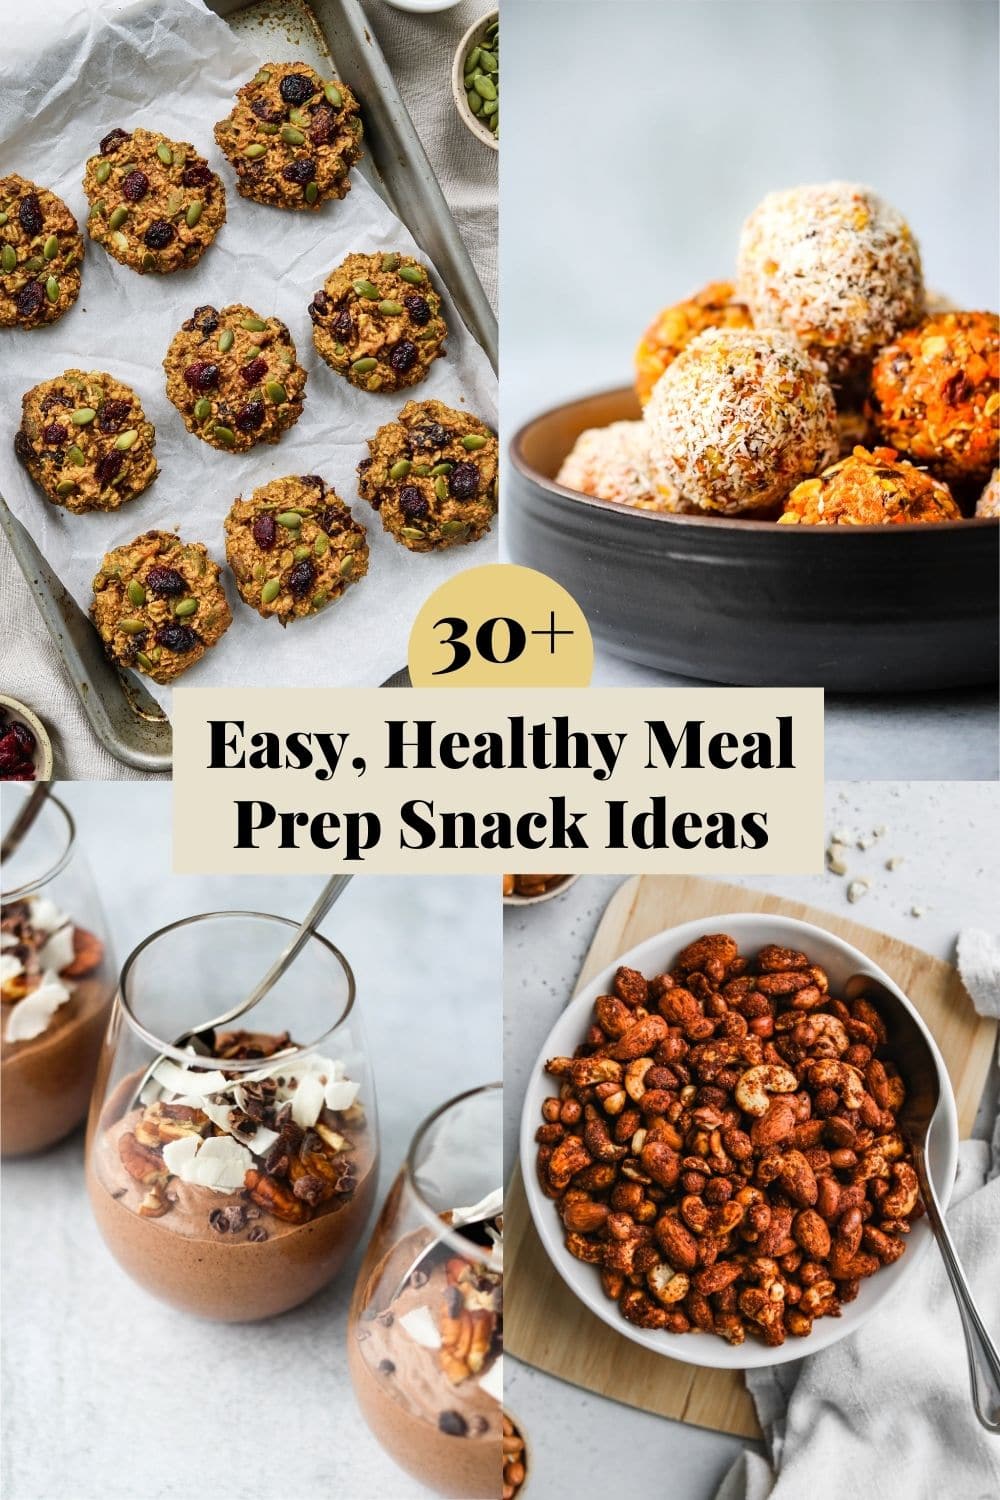 10-Minute No Cook Healthy Lunch Bowls - Beauty Bites